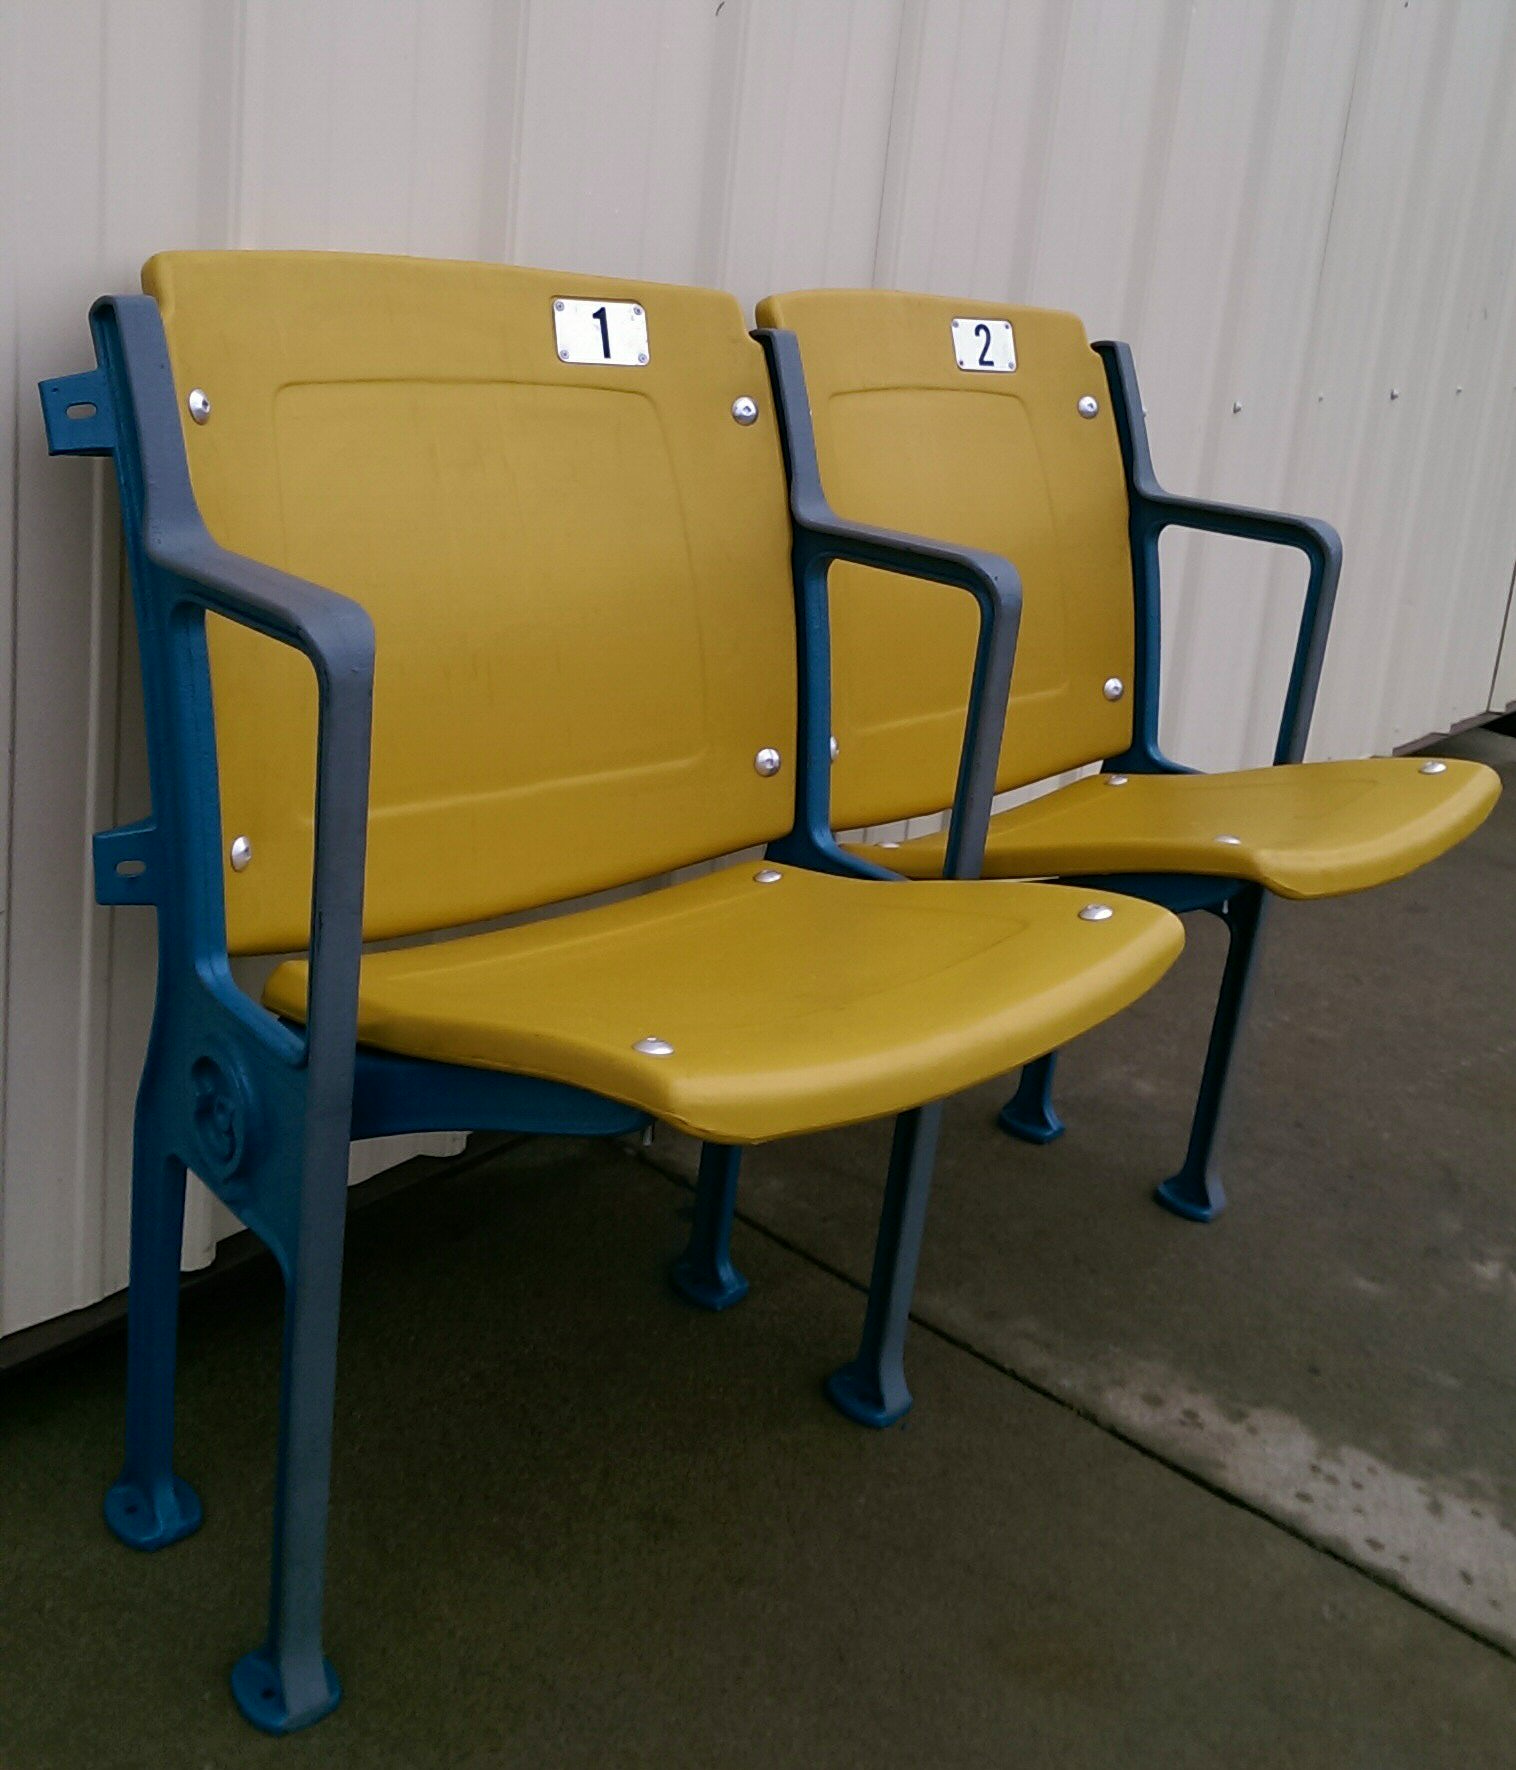 Atlanta-Fulton County Stadium Seats and Chairs for Sale